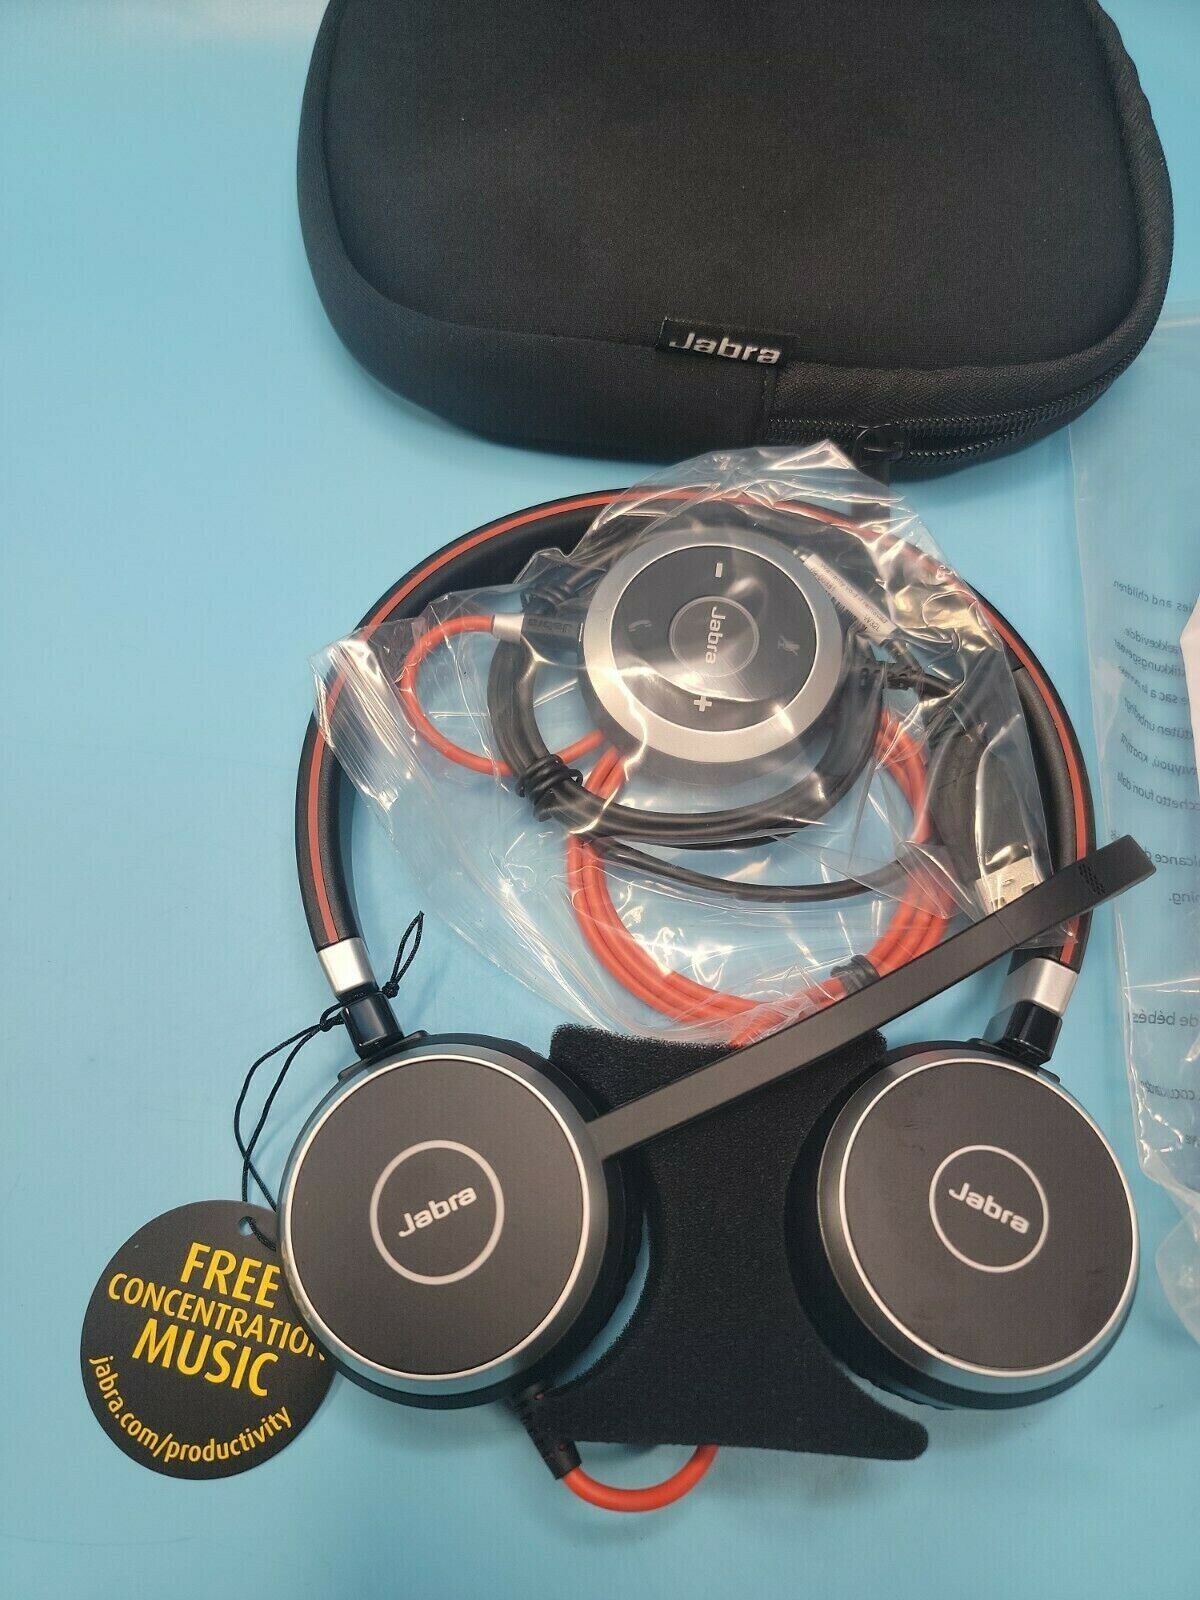 New Jabra Evolve 40 MS On the Ear Wired Headset Stereo - Black - USB Cable